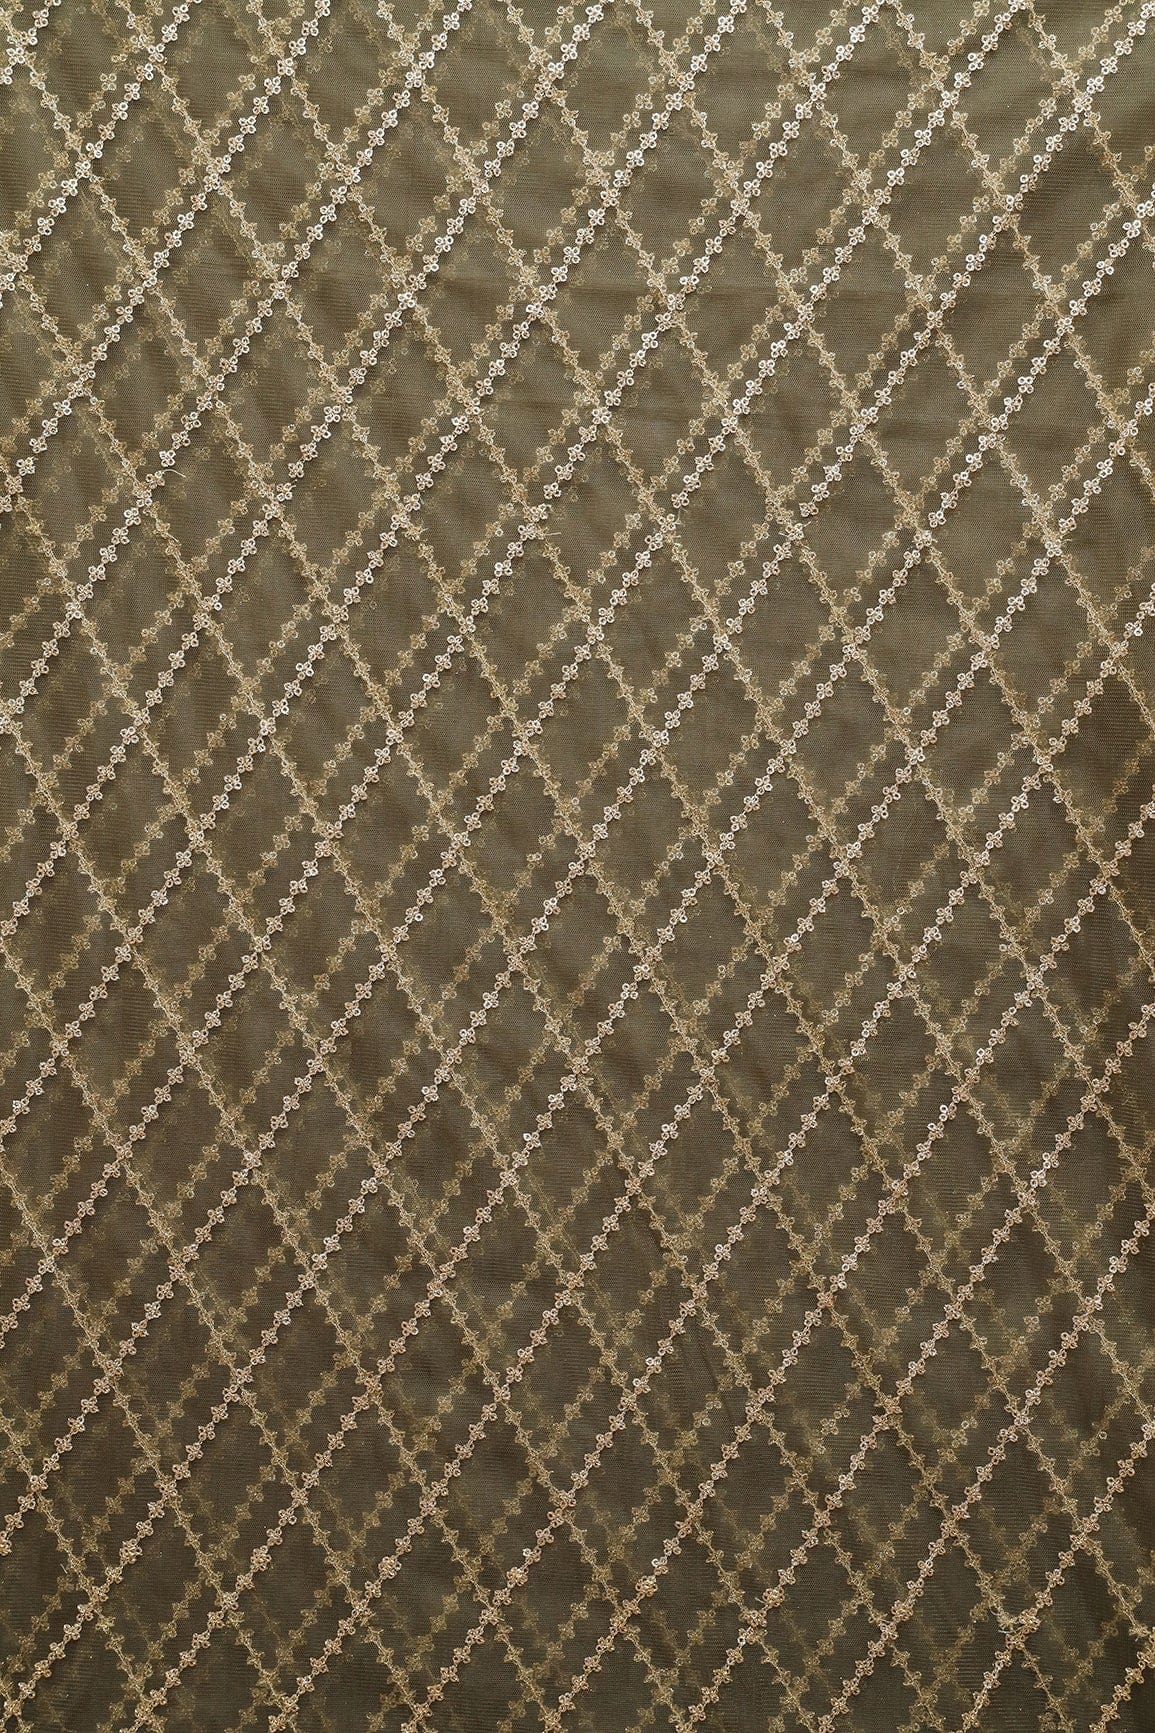 doeraa Embroidery Fabrics 2.50 Meter Cut Piece Of Gold Sequins Gold Zari Stripes Embroidery On Dark Olive Soft Net Fabric